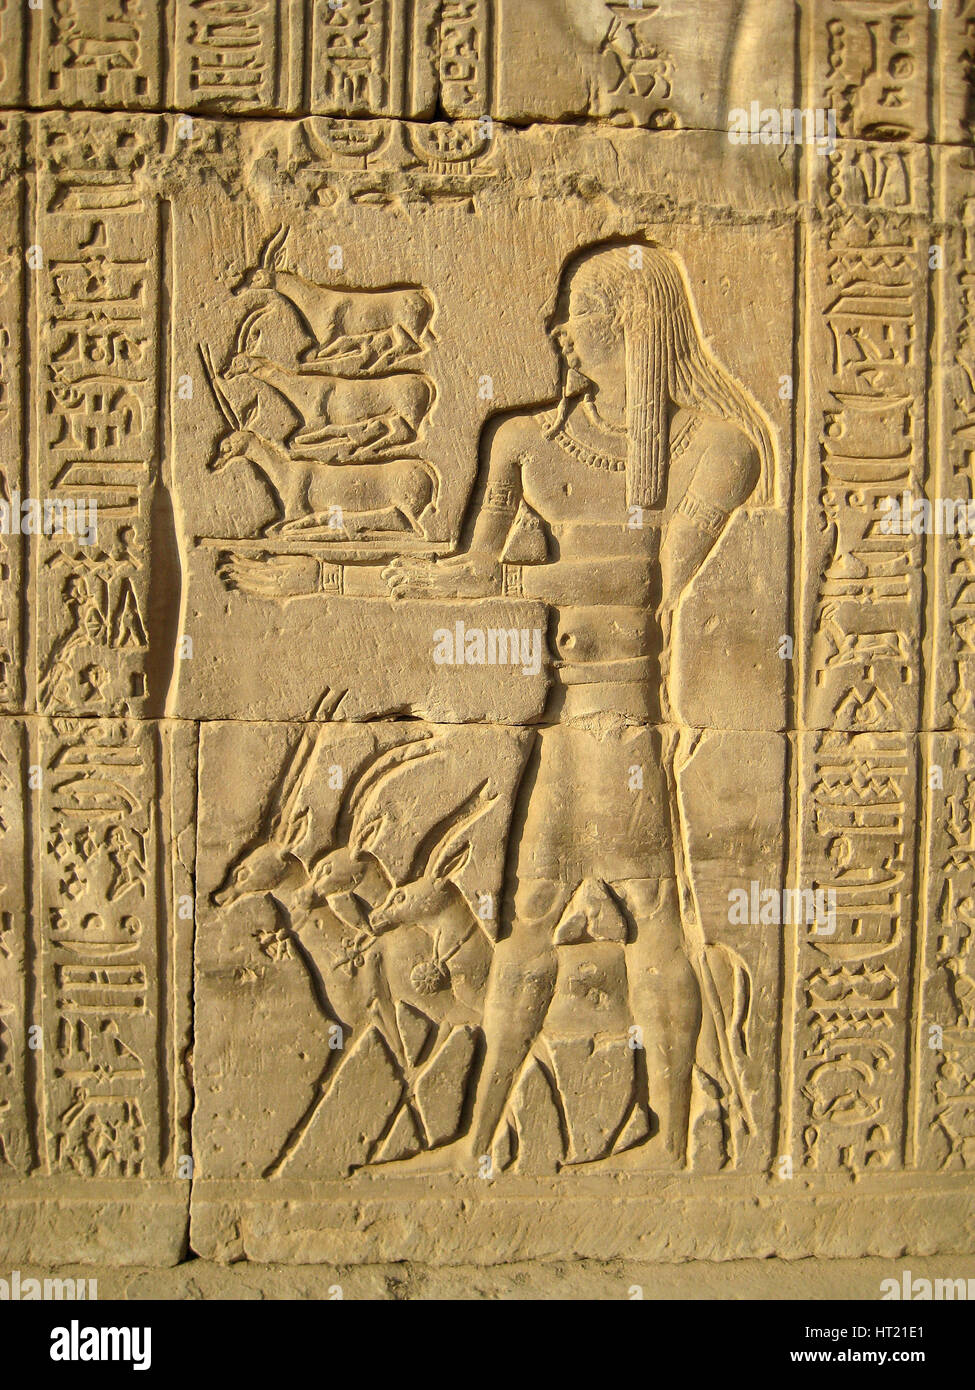 Relie fon the wall of one of the of the temples of Kom Ombo depicting elks. .The southern temple was Artist: Werner Forman. Stock Photo